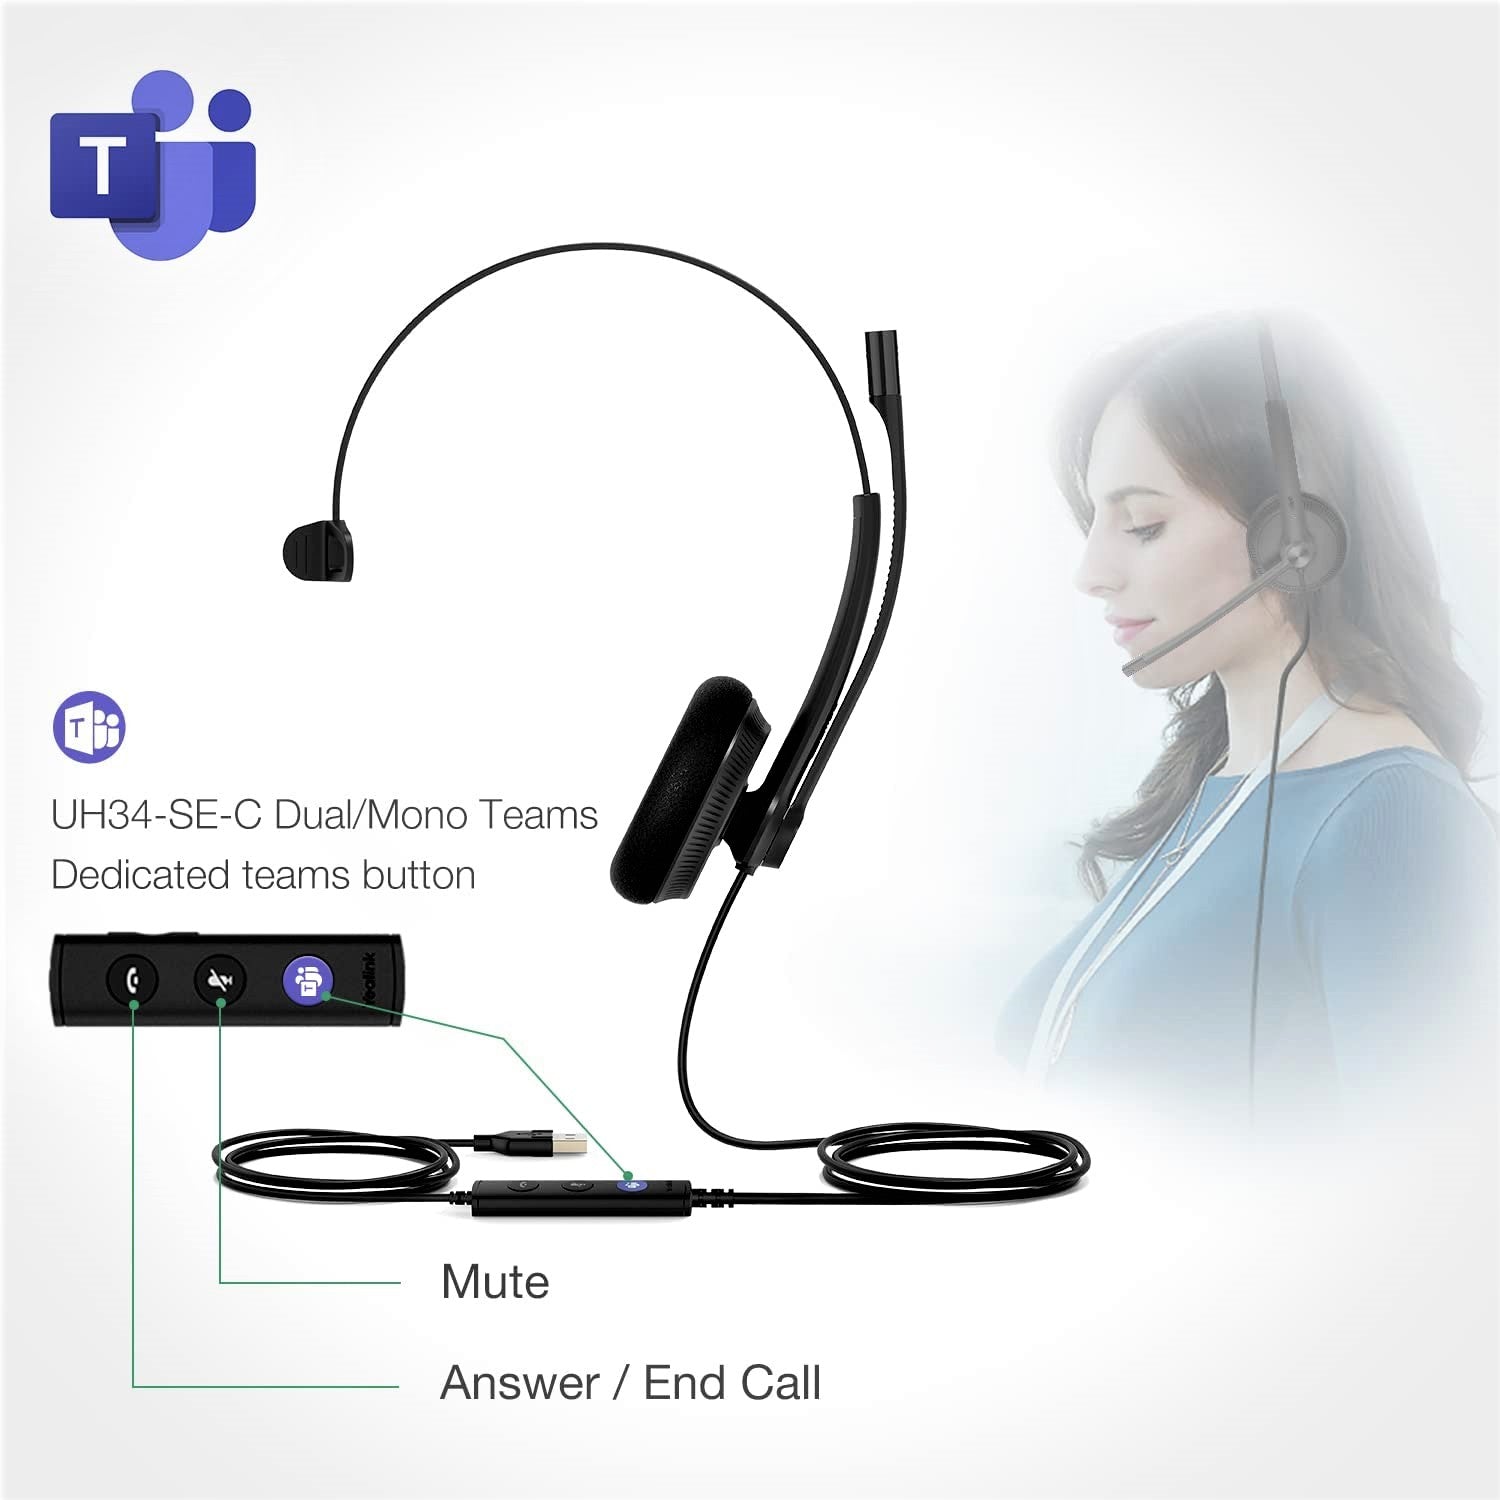 Yealink UH34 Mono USB Wired Headset - Features